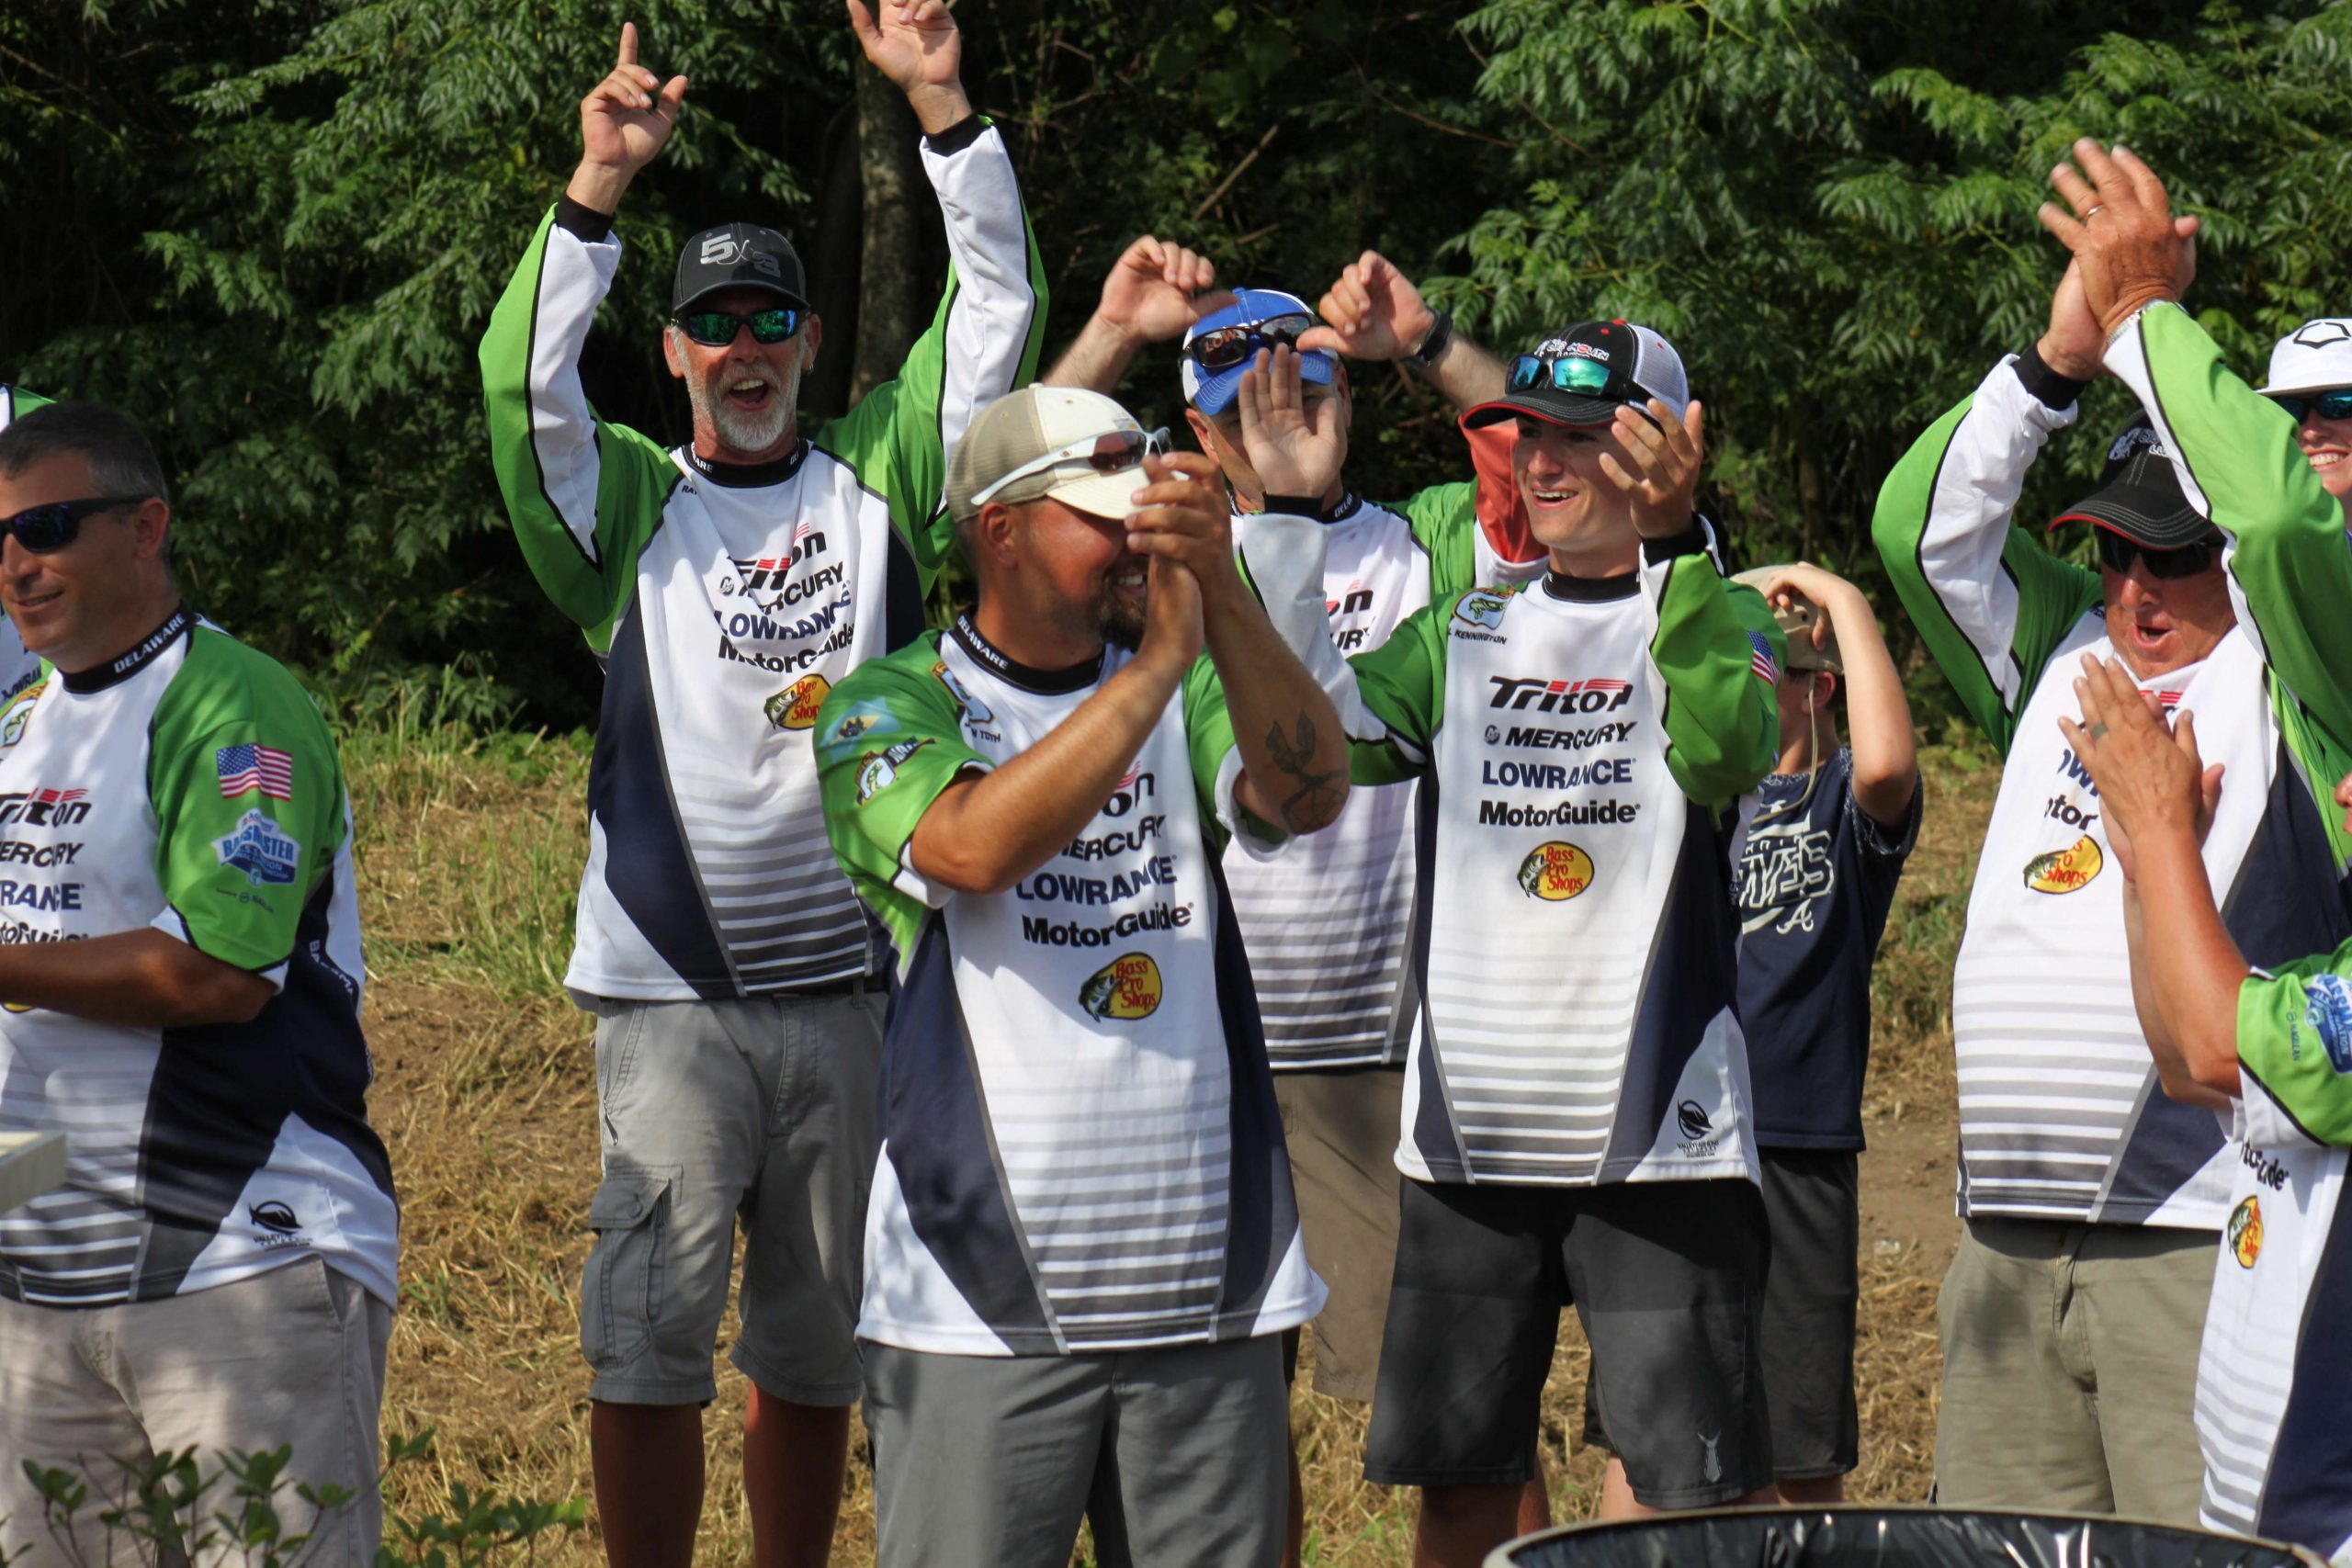 But no anglers were happier than the ones from Team Delaware, who won the team competition on Thursday. Ten boaters and 10 non-boaters teamed to catch 114 bass that weighed 172 pounds, 9 ounces. That was exactly one pound heavier than Team South Carolina and five pounds better than Team Florida.